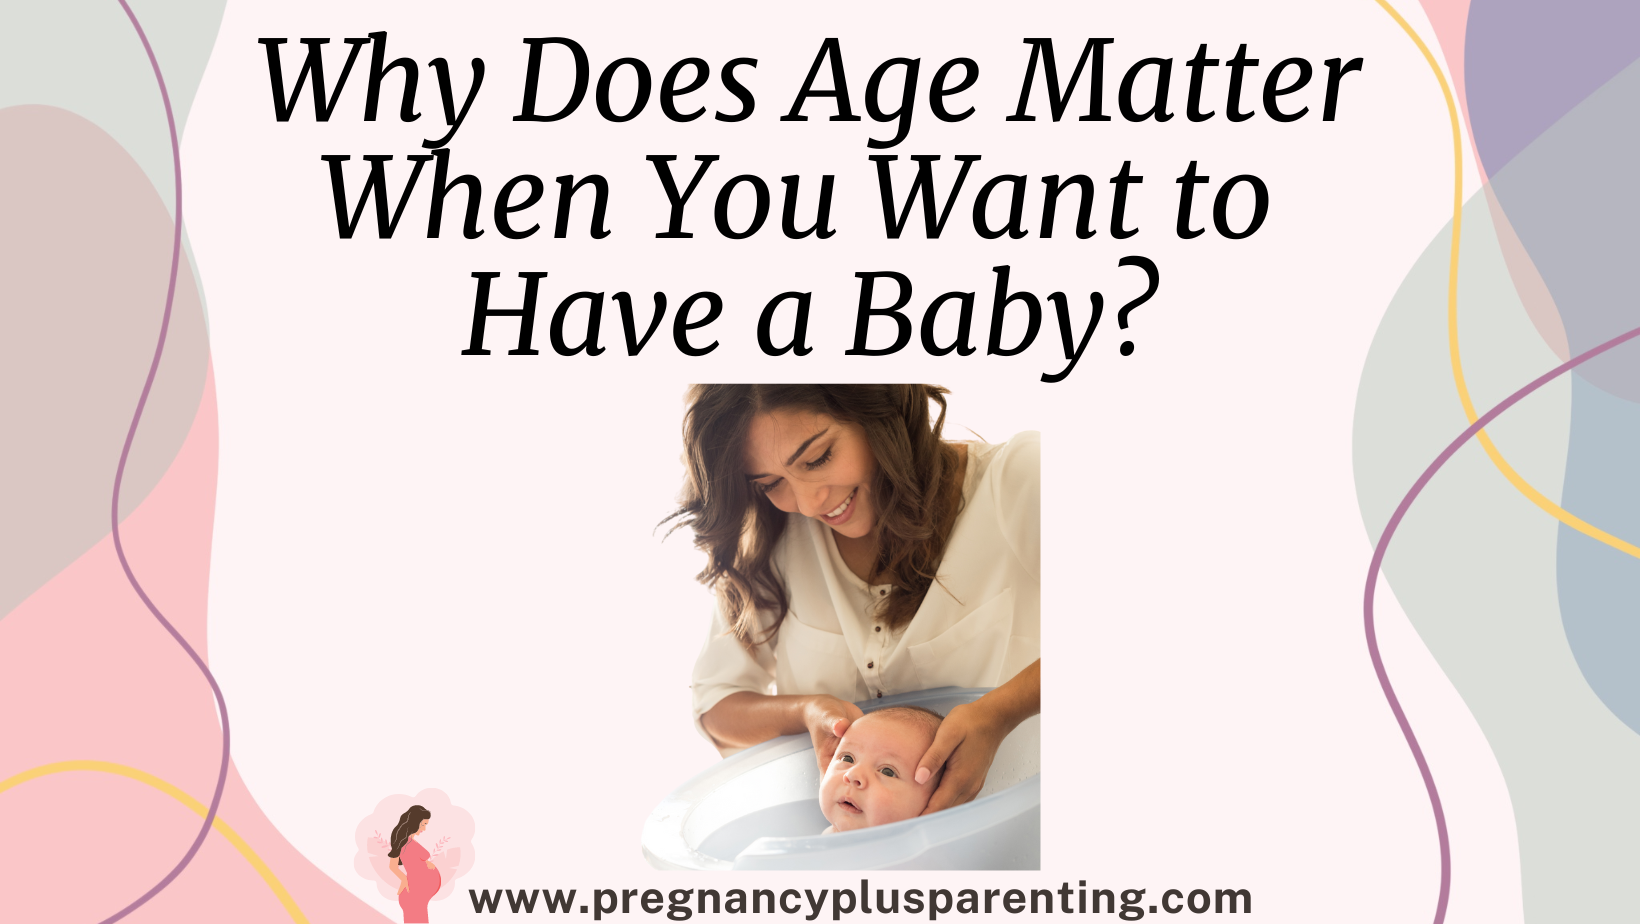 Why Does Age Matter When You Want to Have a Baby?